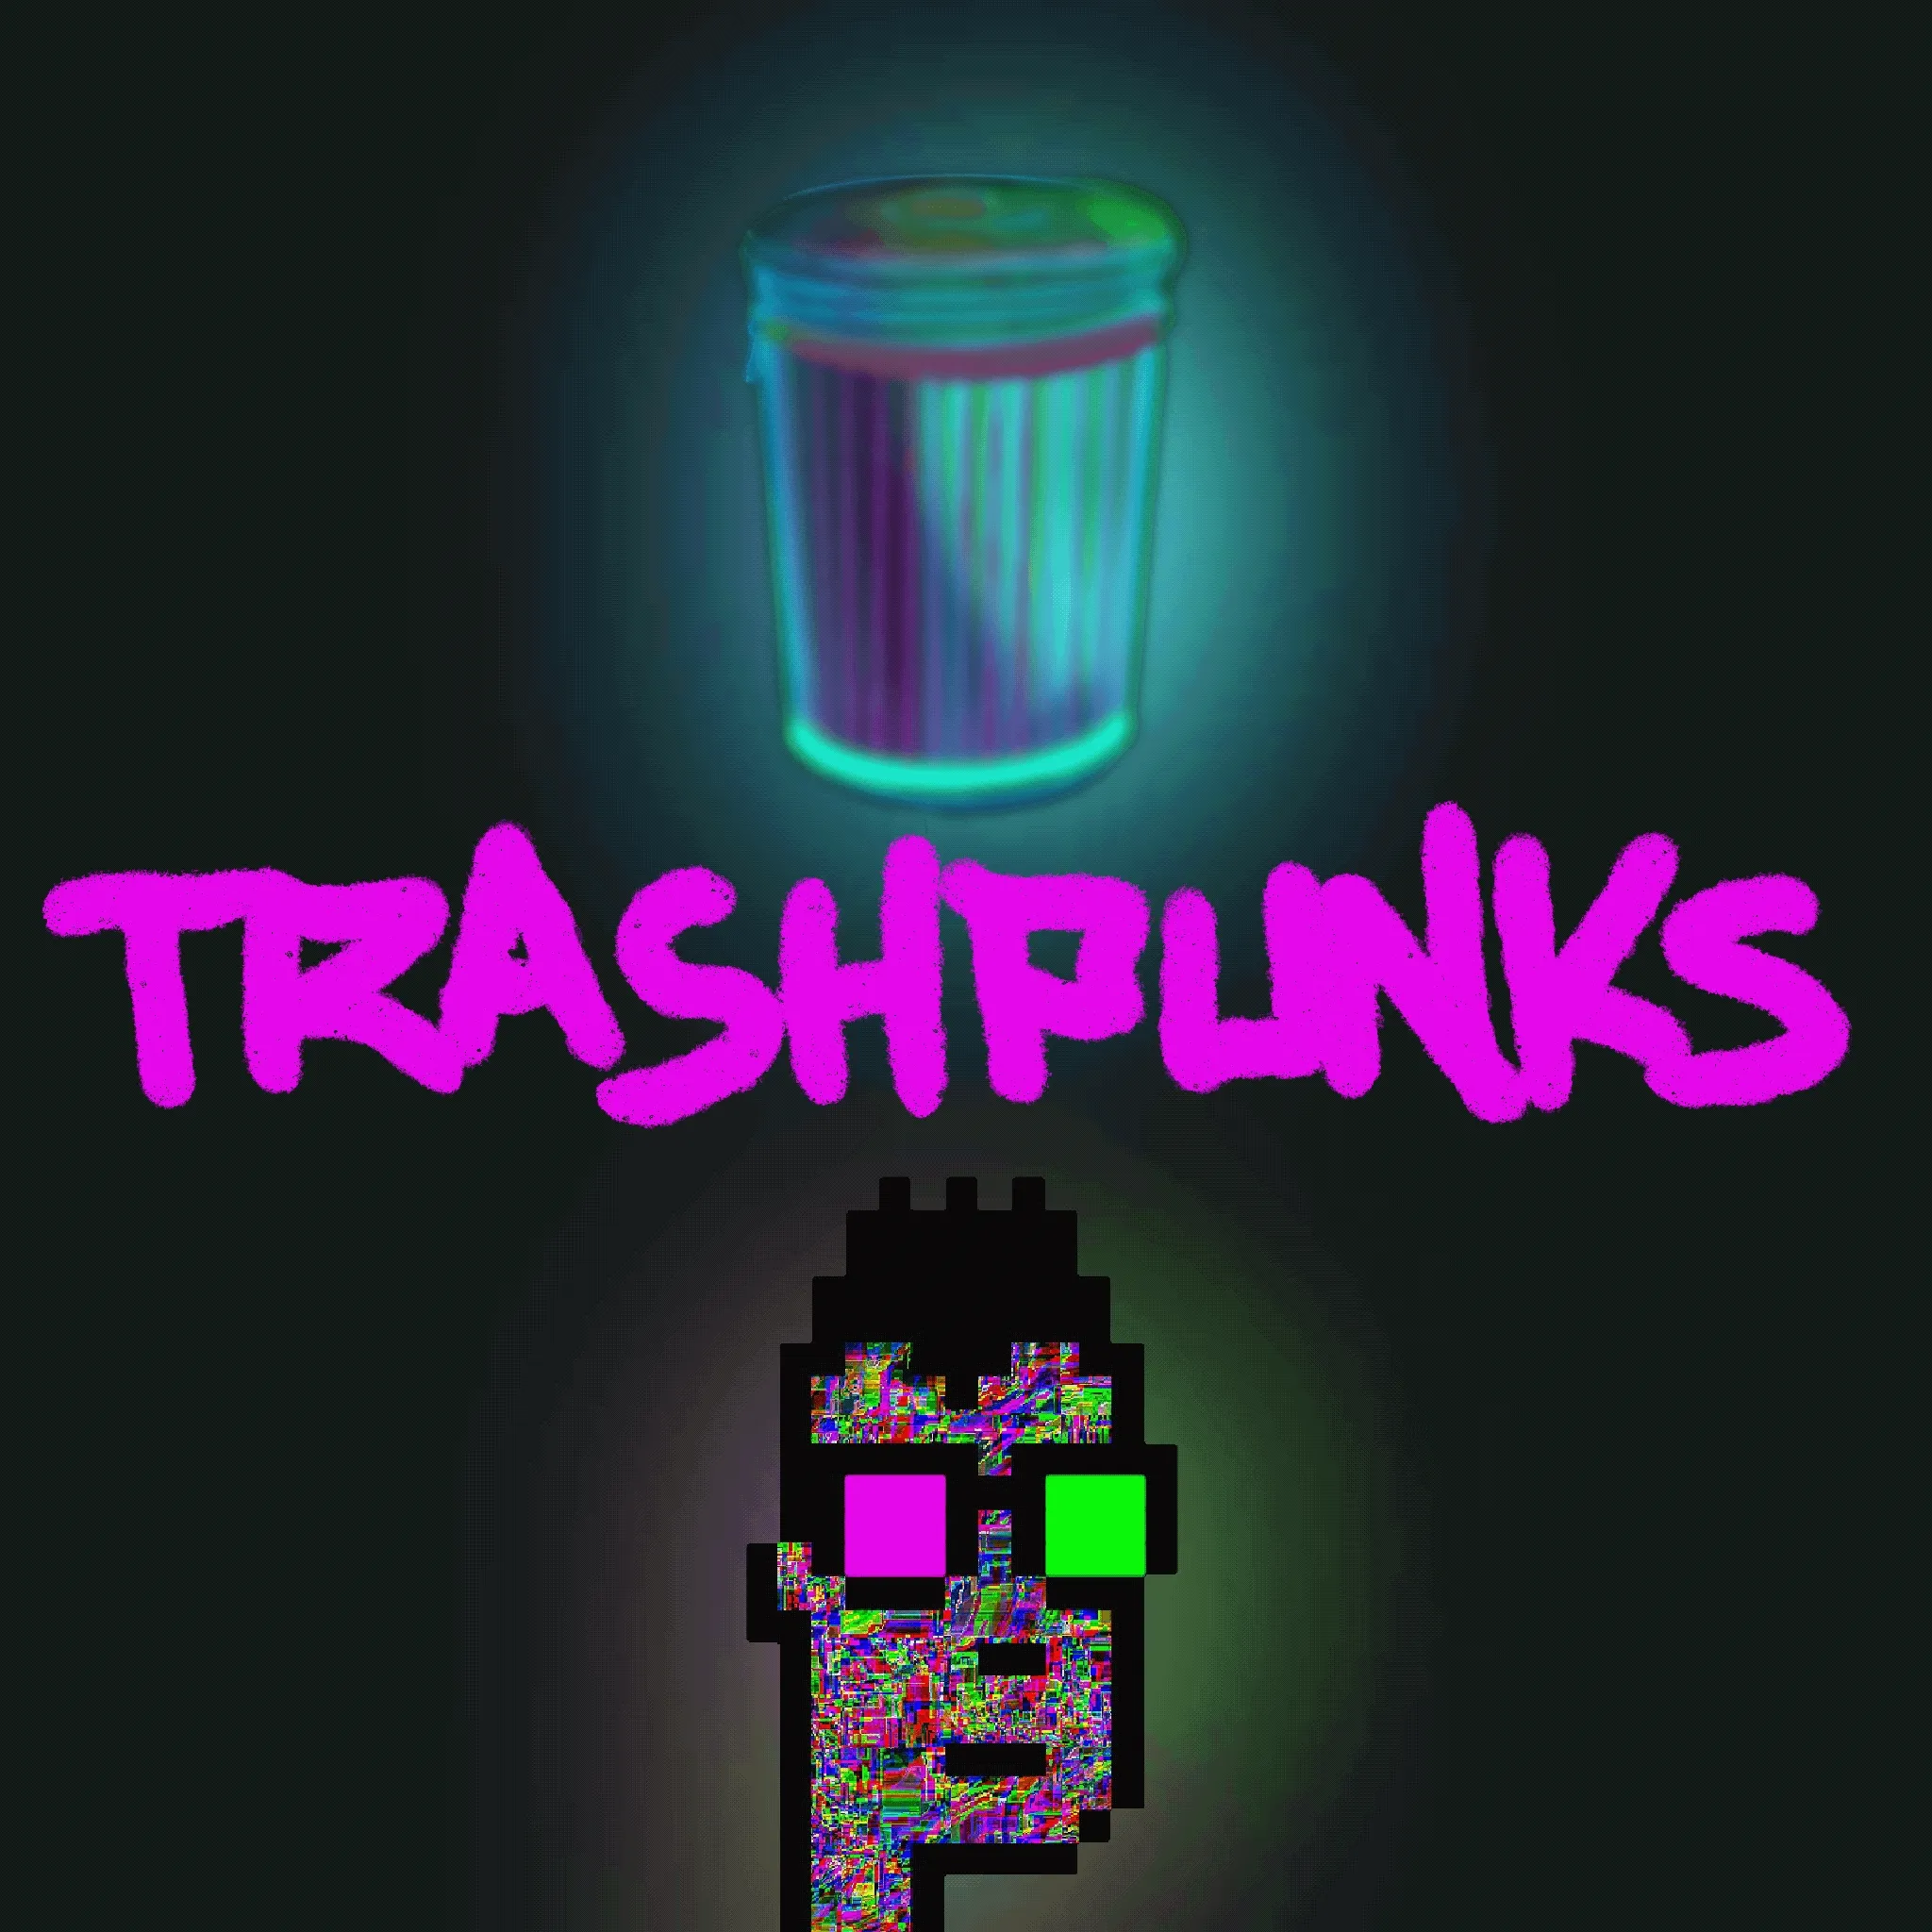 TRASHPUNKS V1 - COLLECTION moved to official contract.